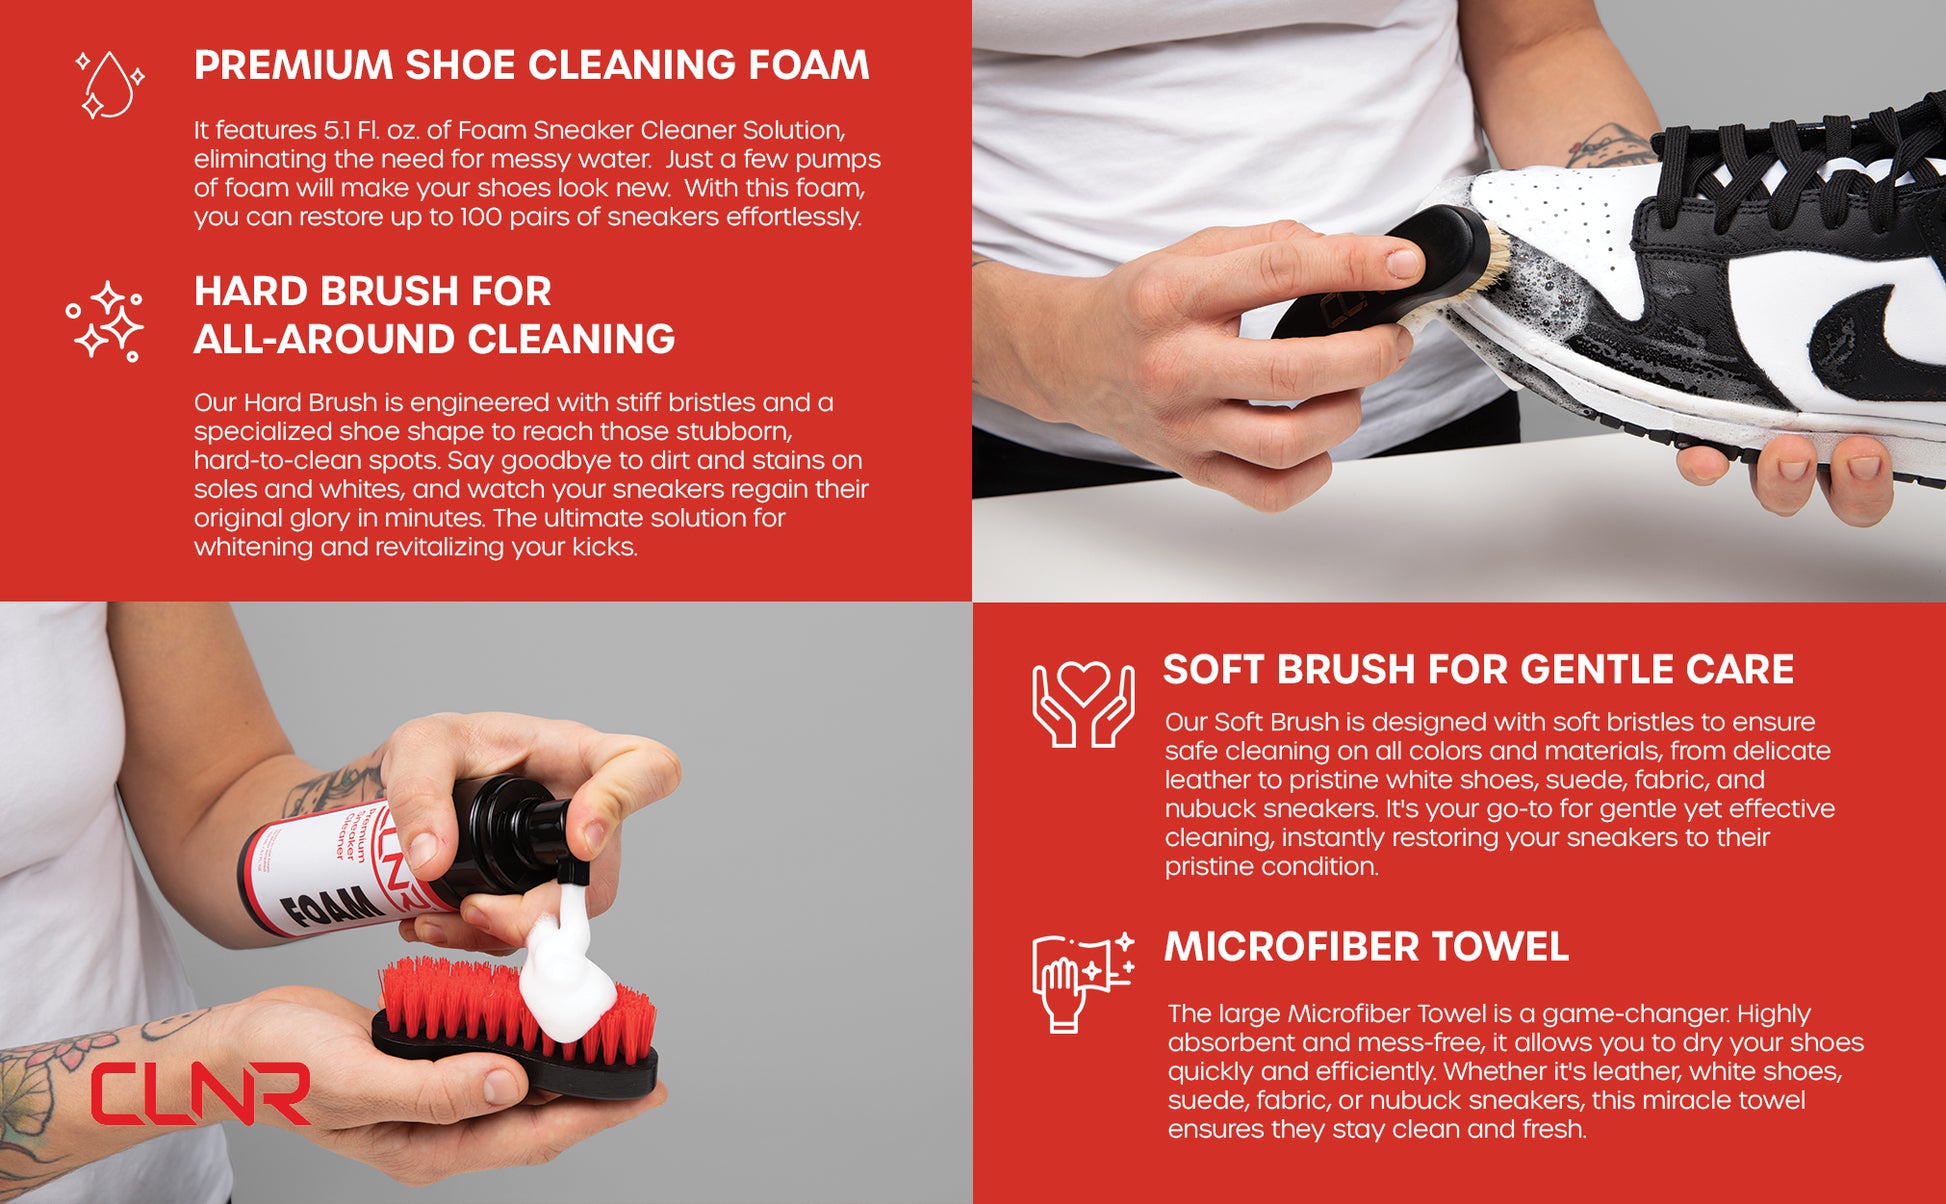 Hands down this companies shoe cleaning products are second to none. Not  paid advertising by the way lol. : r/Sneakers